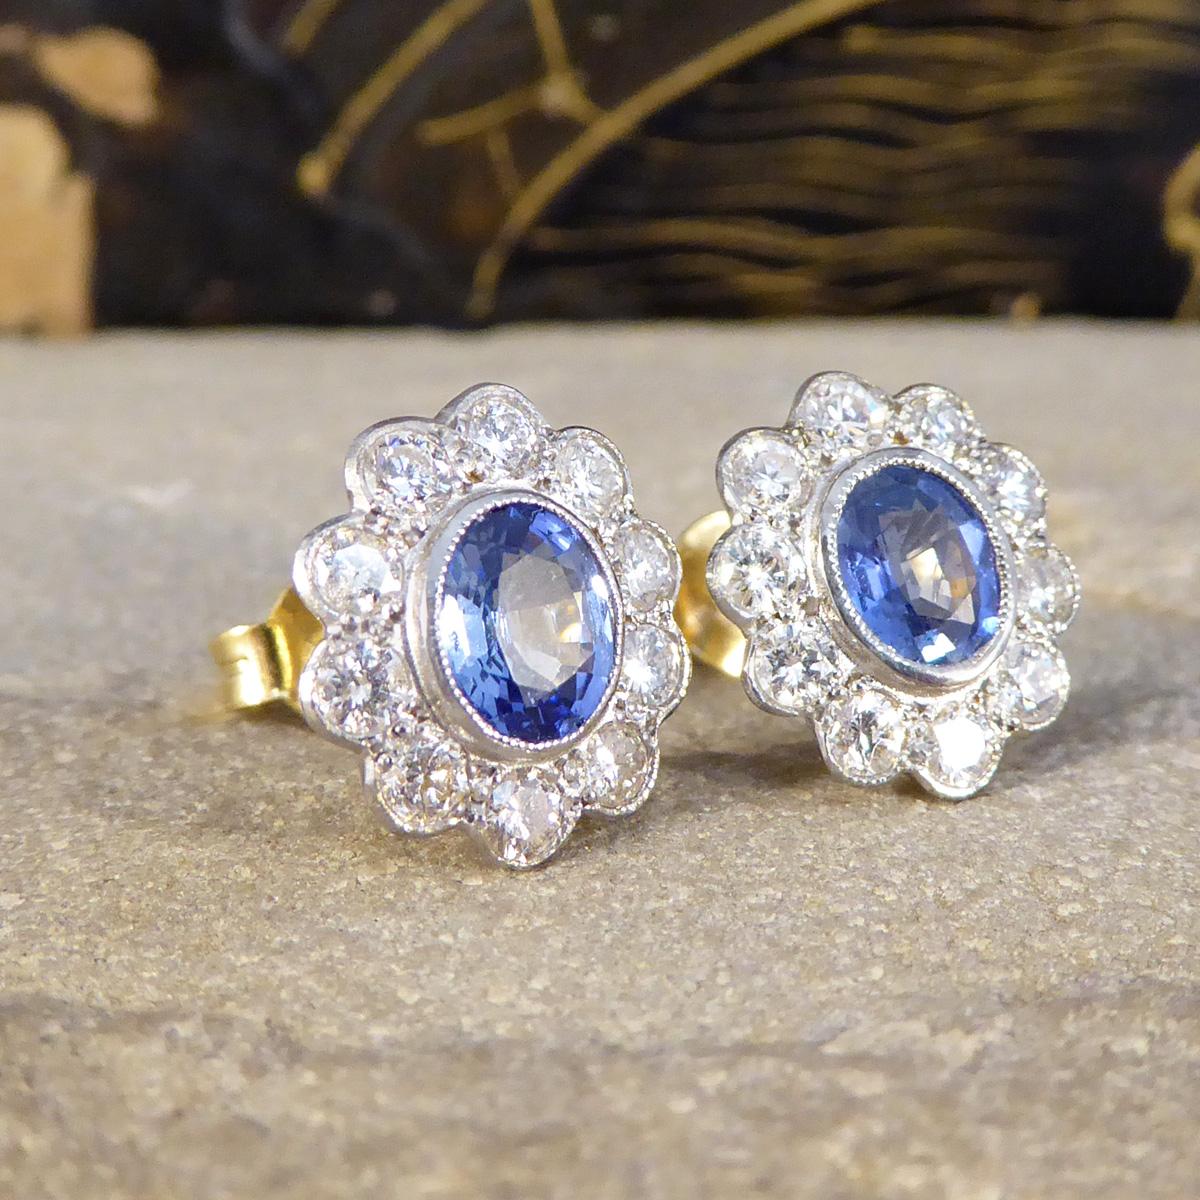 Oval Cut Edwardian Inspired Sapphire and Diamond Cluster Earrings in 18ct Gold